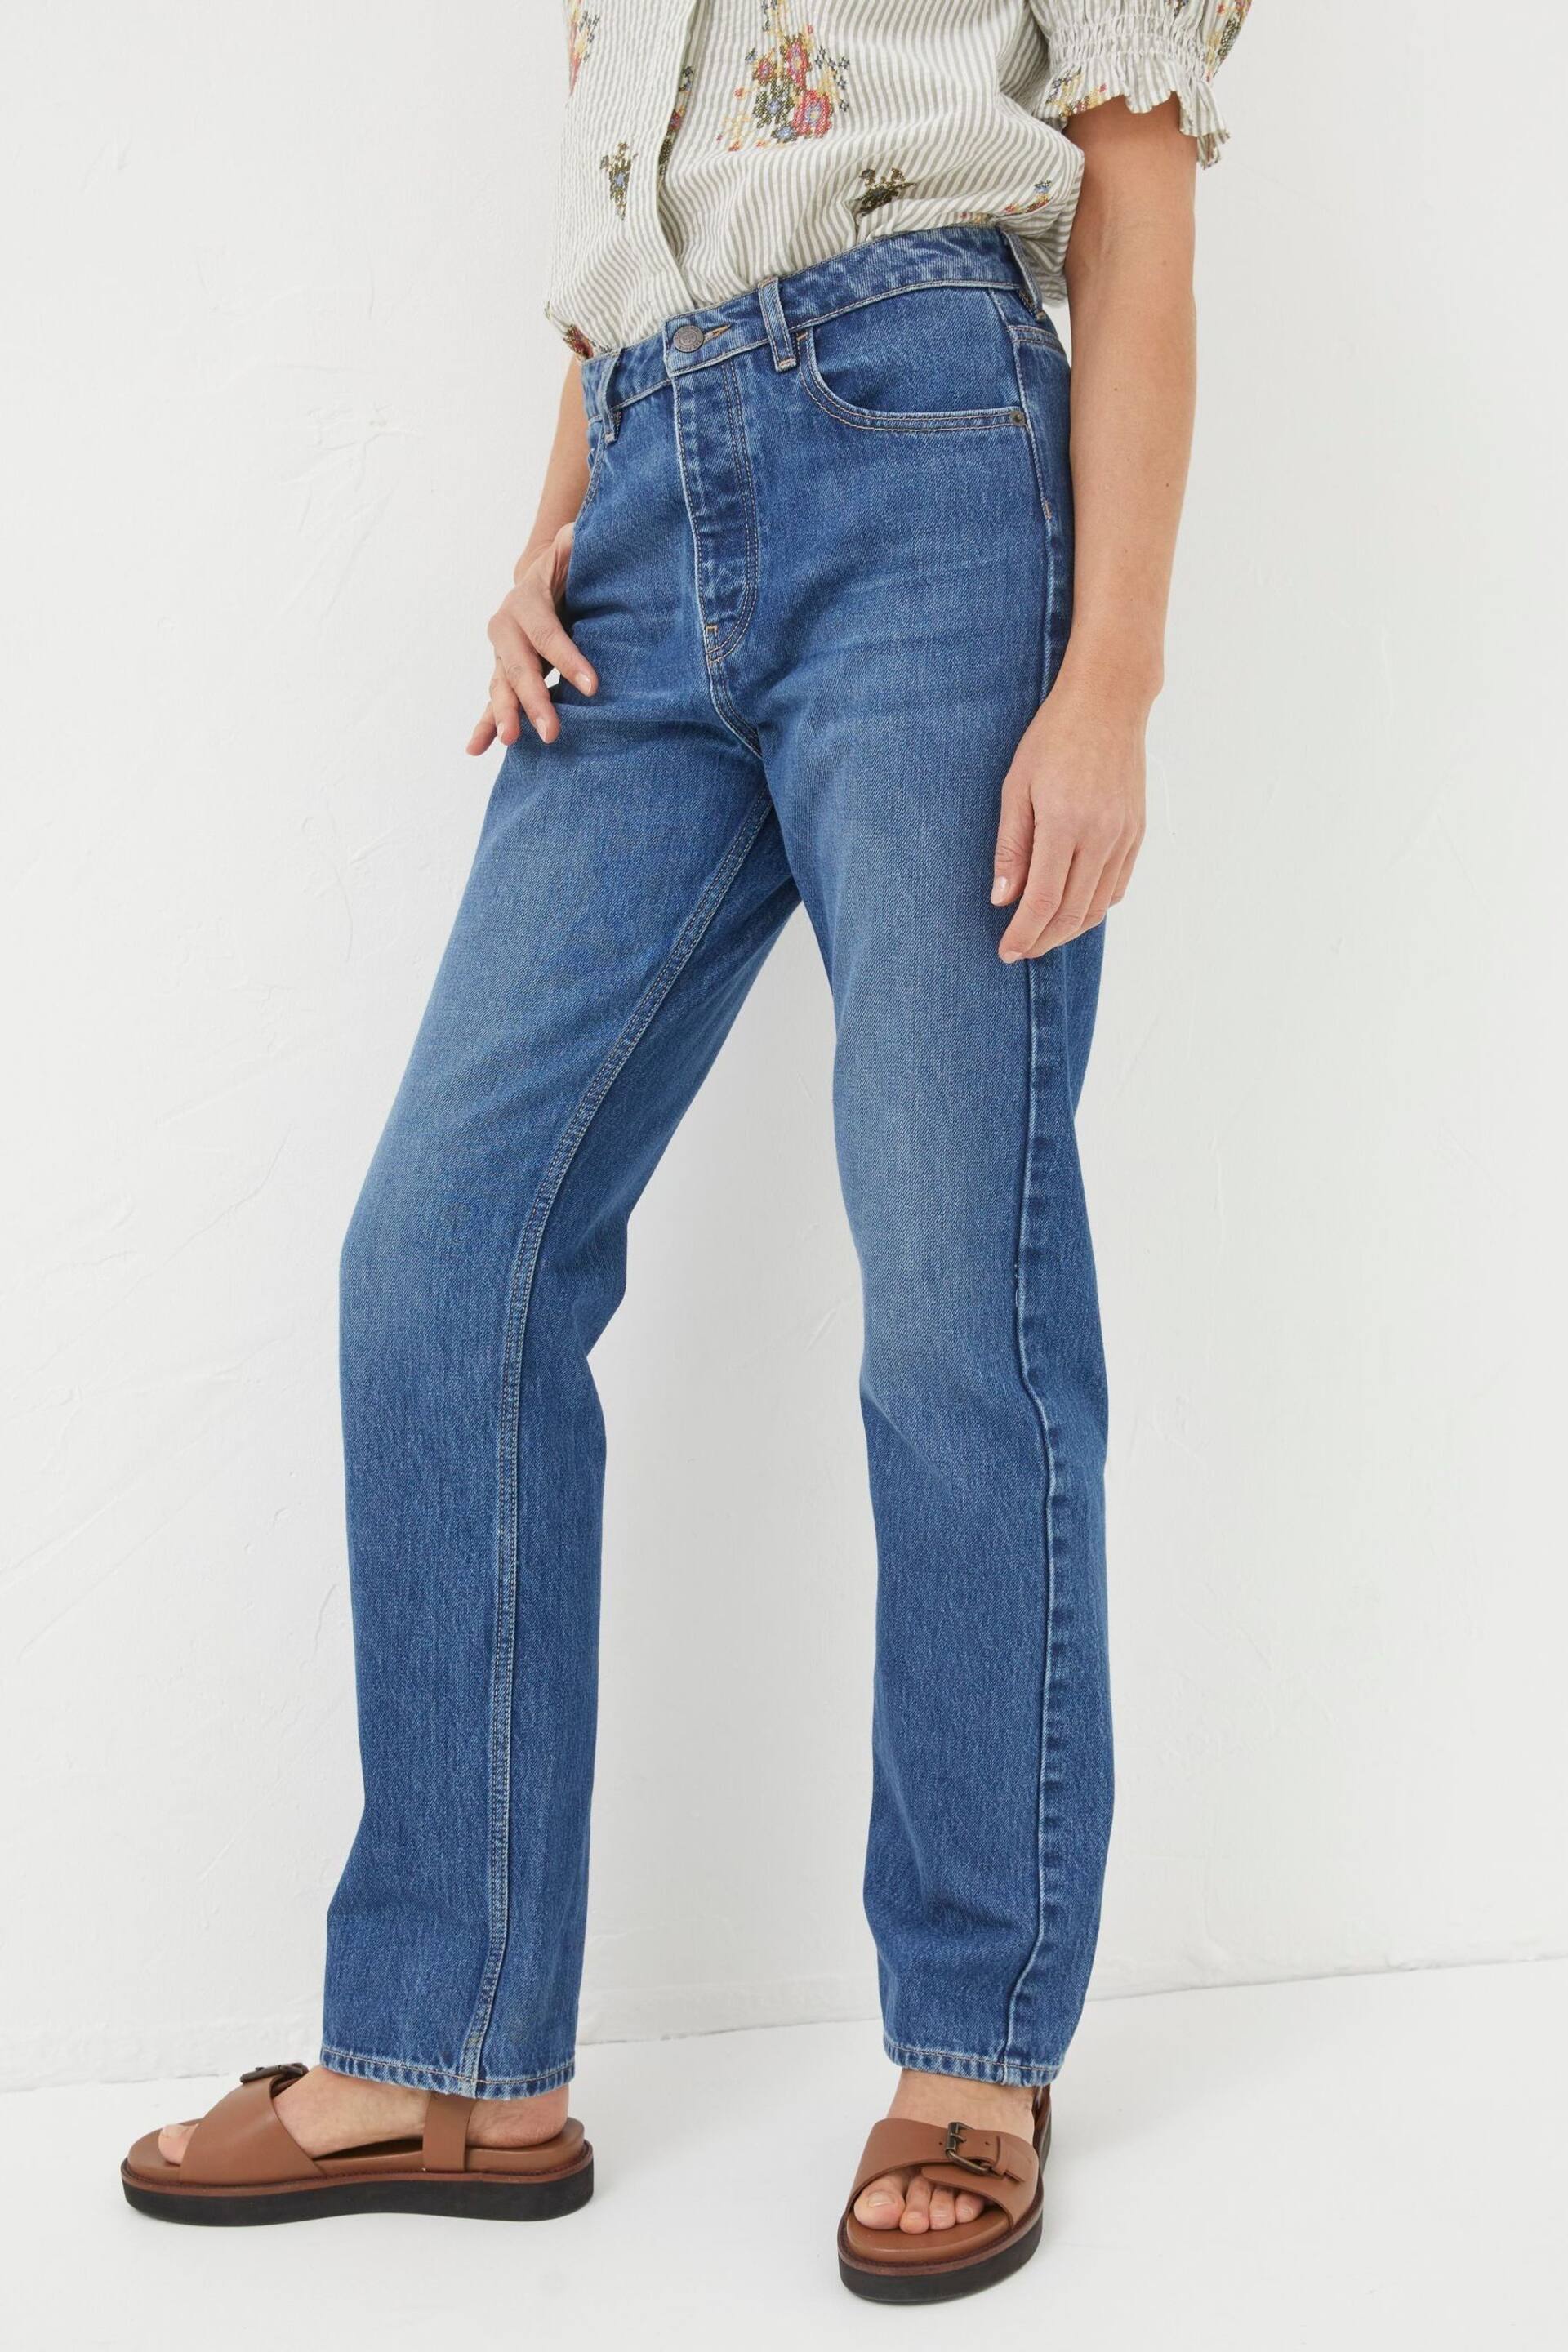 FatFace Blue Sutton Straight Jeans - Image 1 of 5